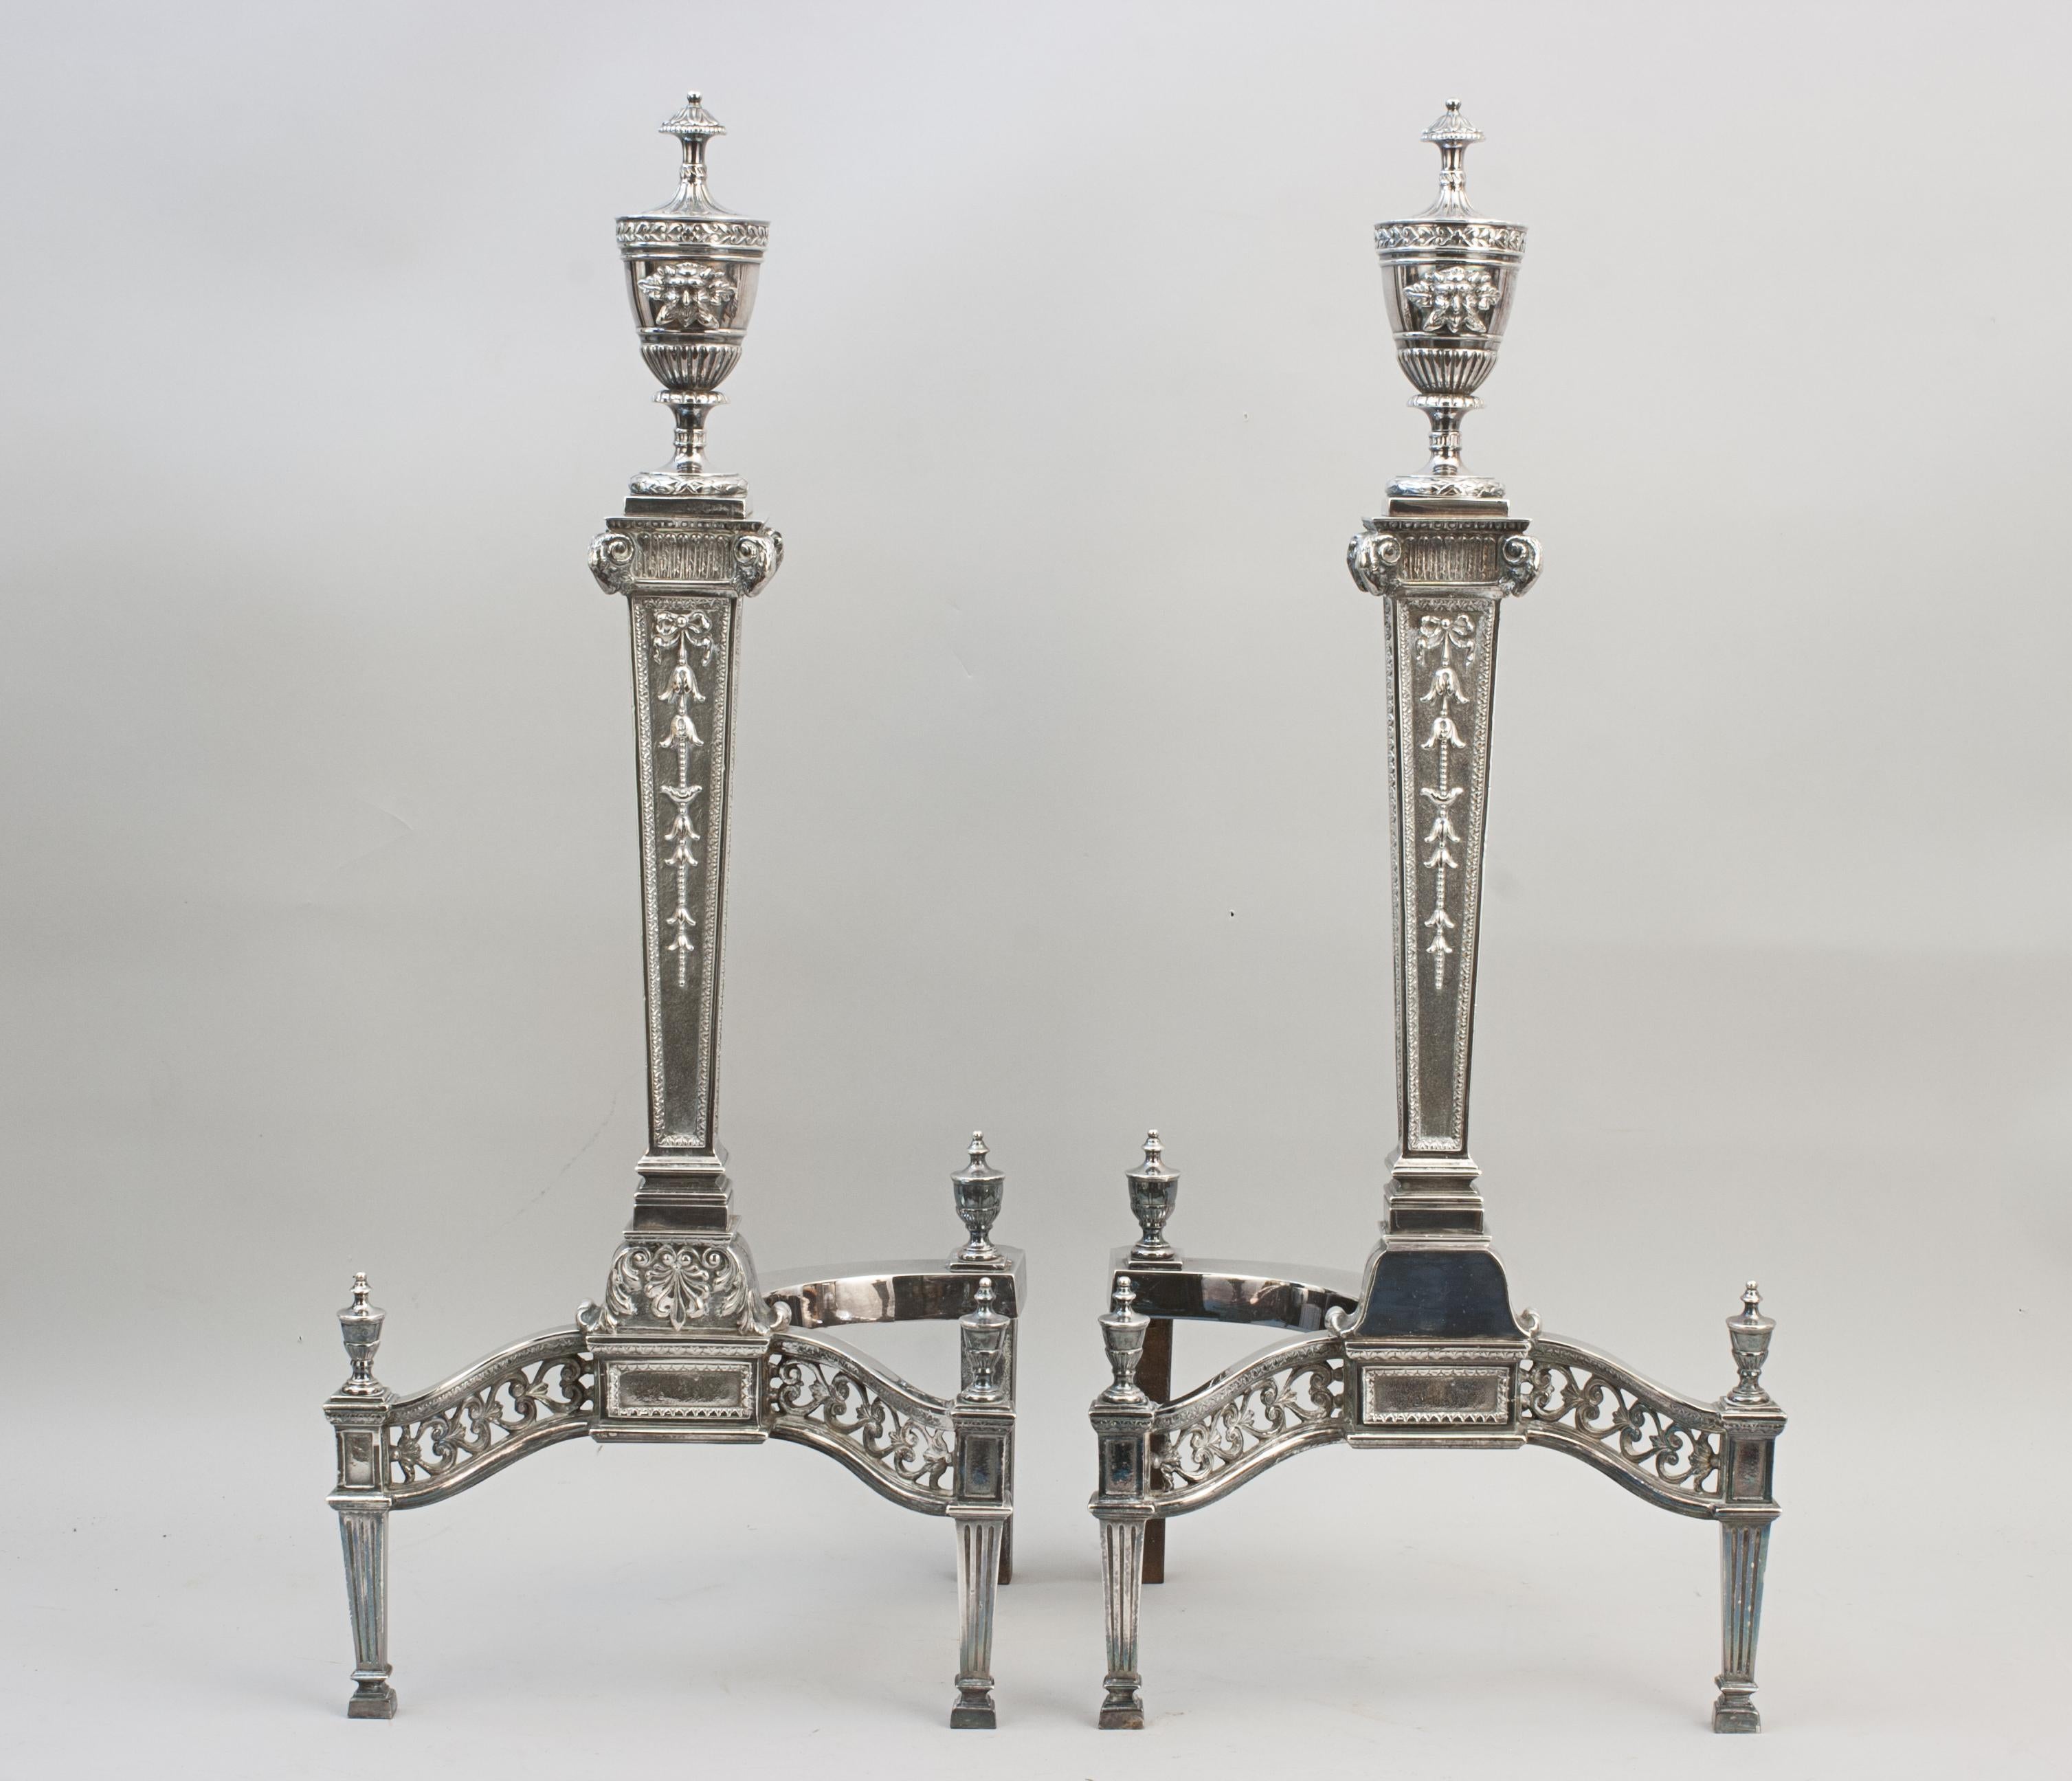 High Quality Plated Firedogs, Andirons, Chenets.
A pair of elegant, tall classical style fire dogs, andirons, with tumbling floral decoration and topped urn finials, the front legs with pierced fret work. If you want your fireplace to be a real